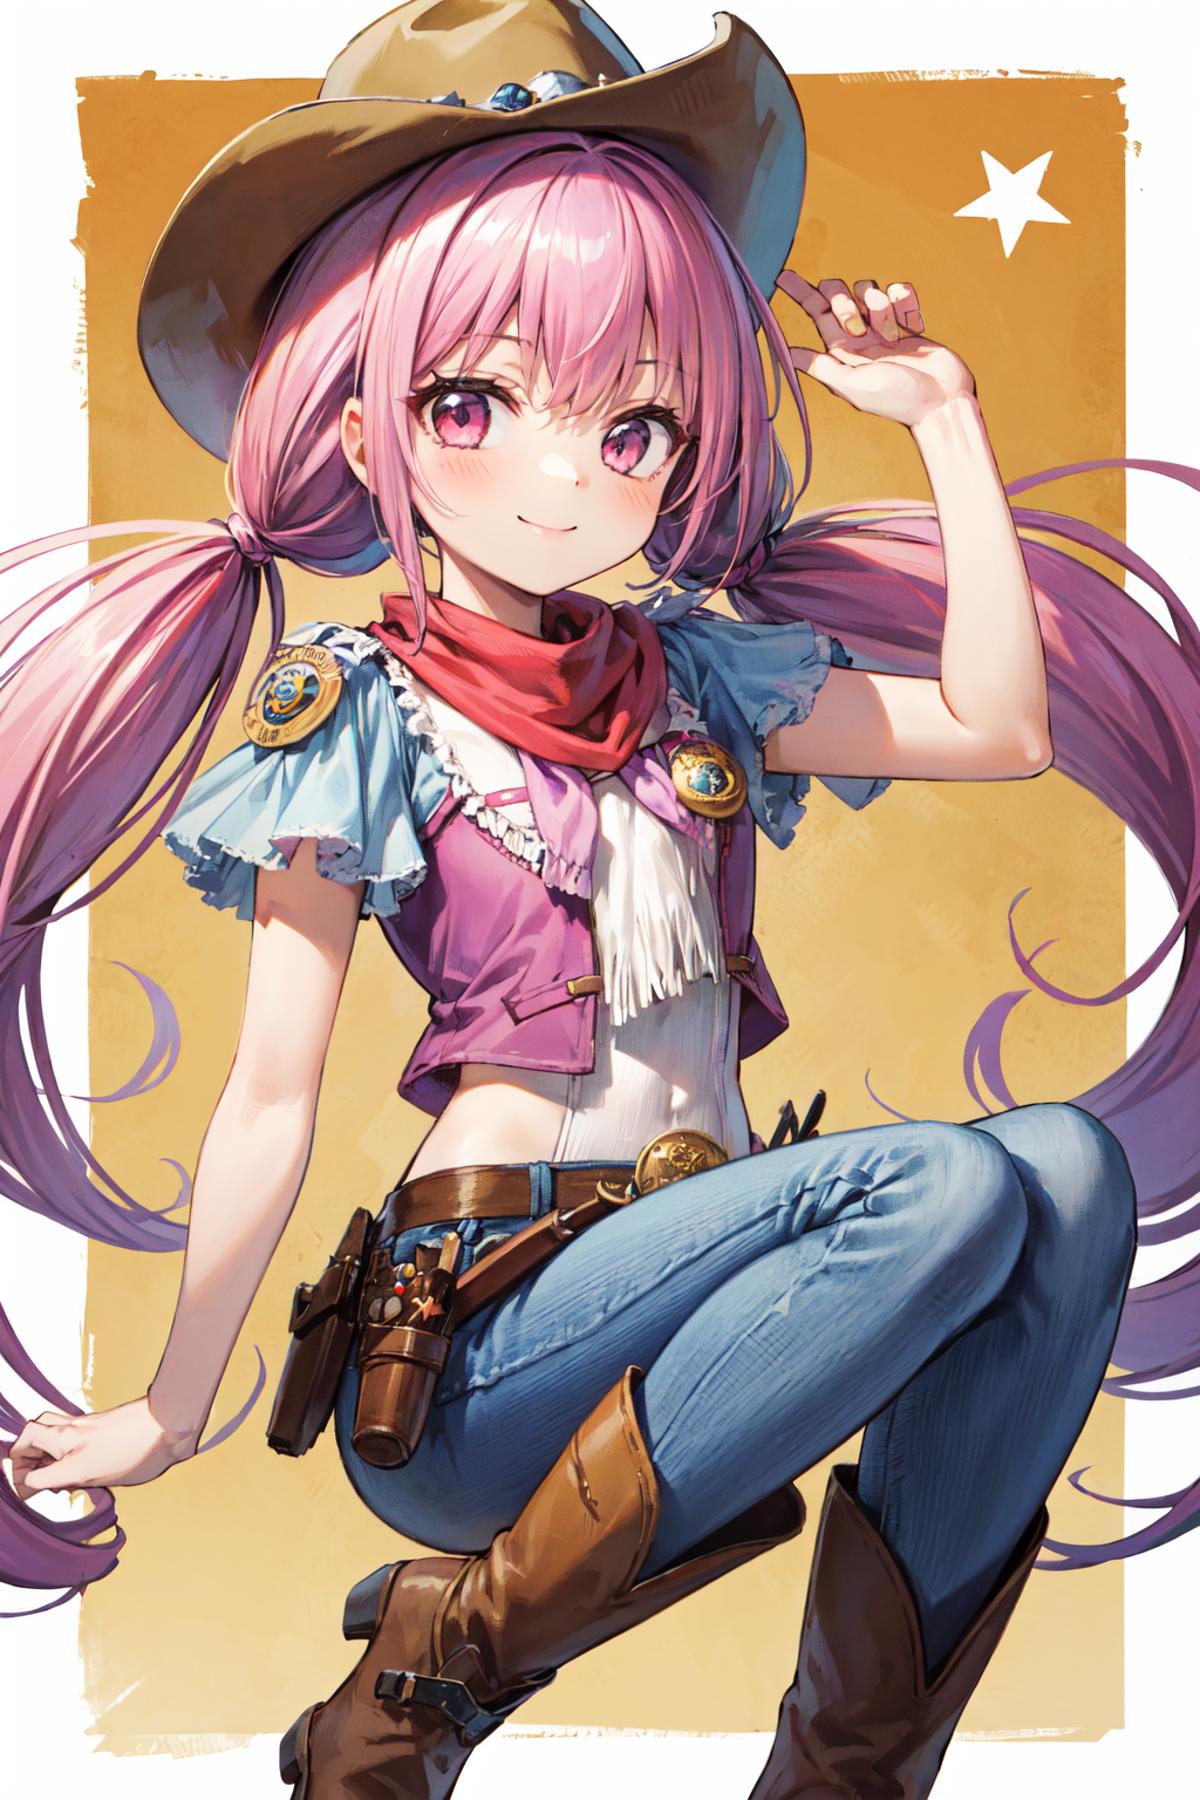 Anime girl with pink hair wearing a cowgirl outfit and holding a gun.